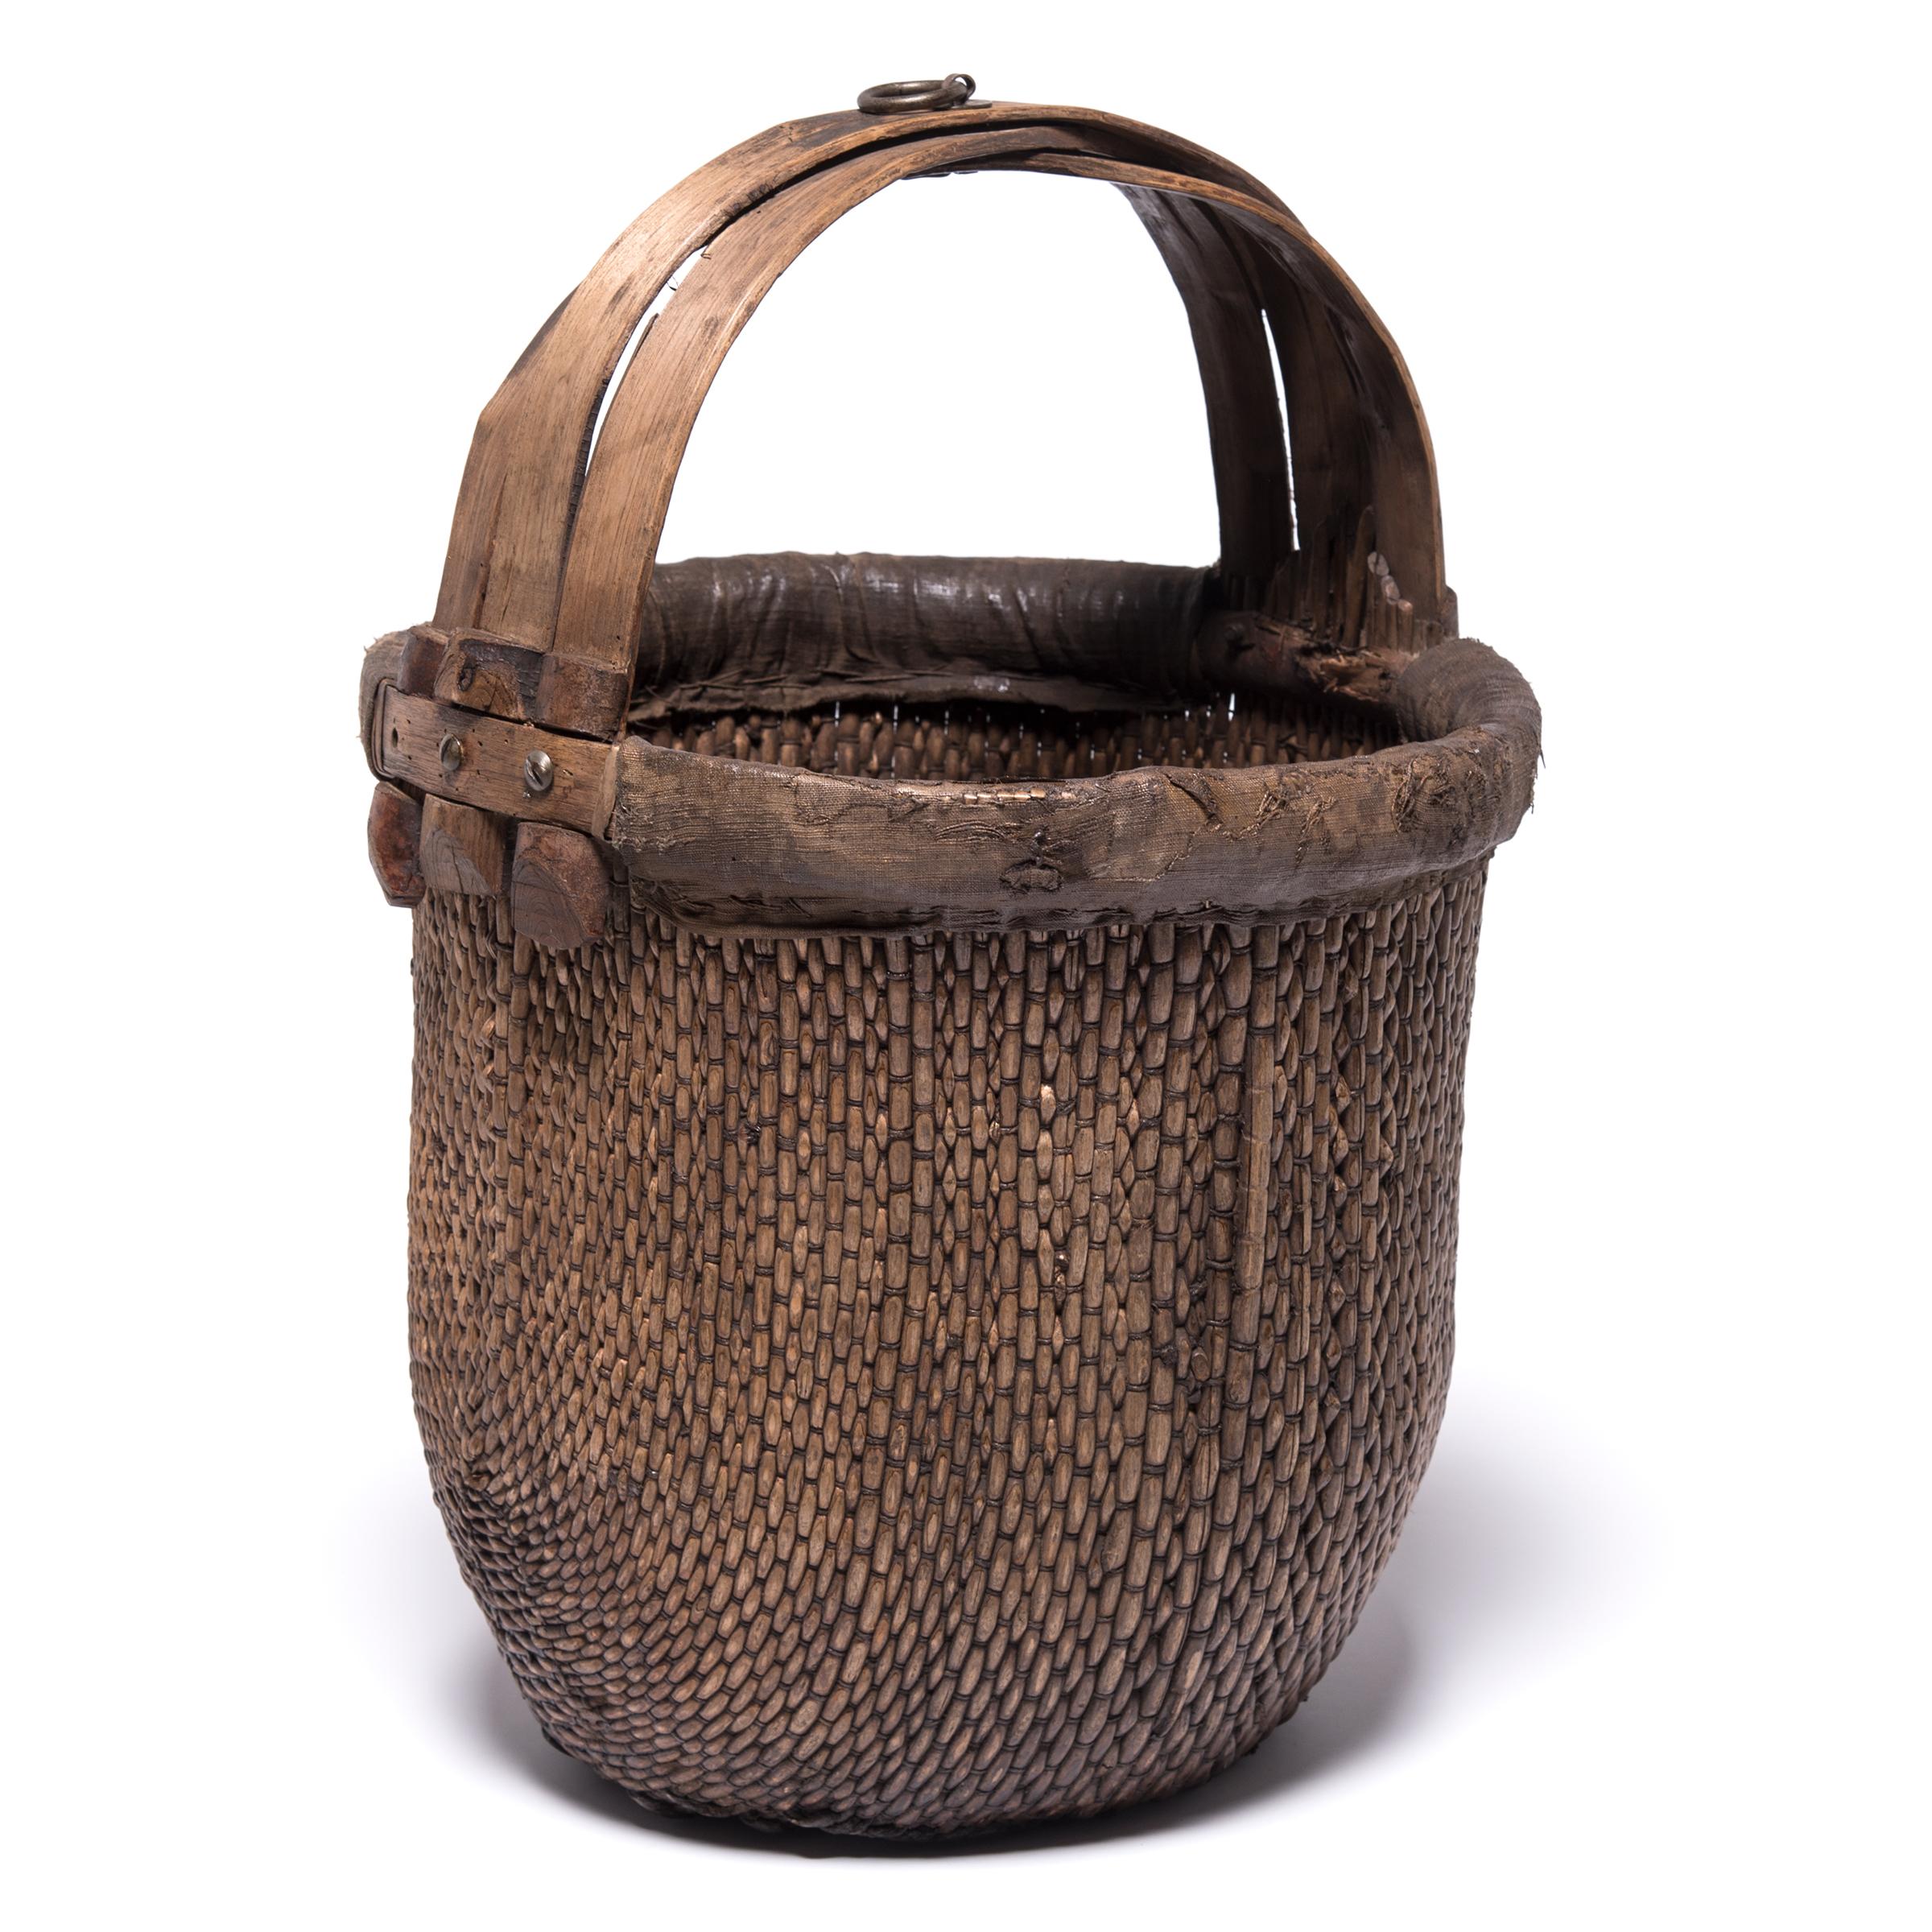 Basket making is an ancient and humble craft, but in the hands of a skilled weaver a simple willow basket becomes a truly beautiful statement. The artisan’s mastery is evident in this early 20th century bent handle basket: the strong, flexible